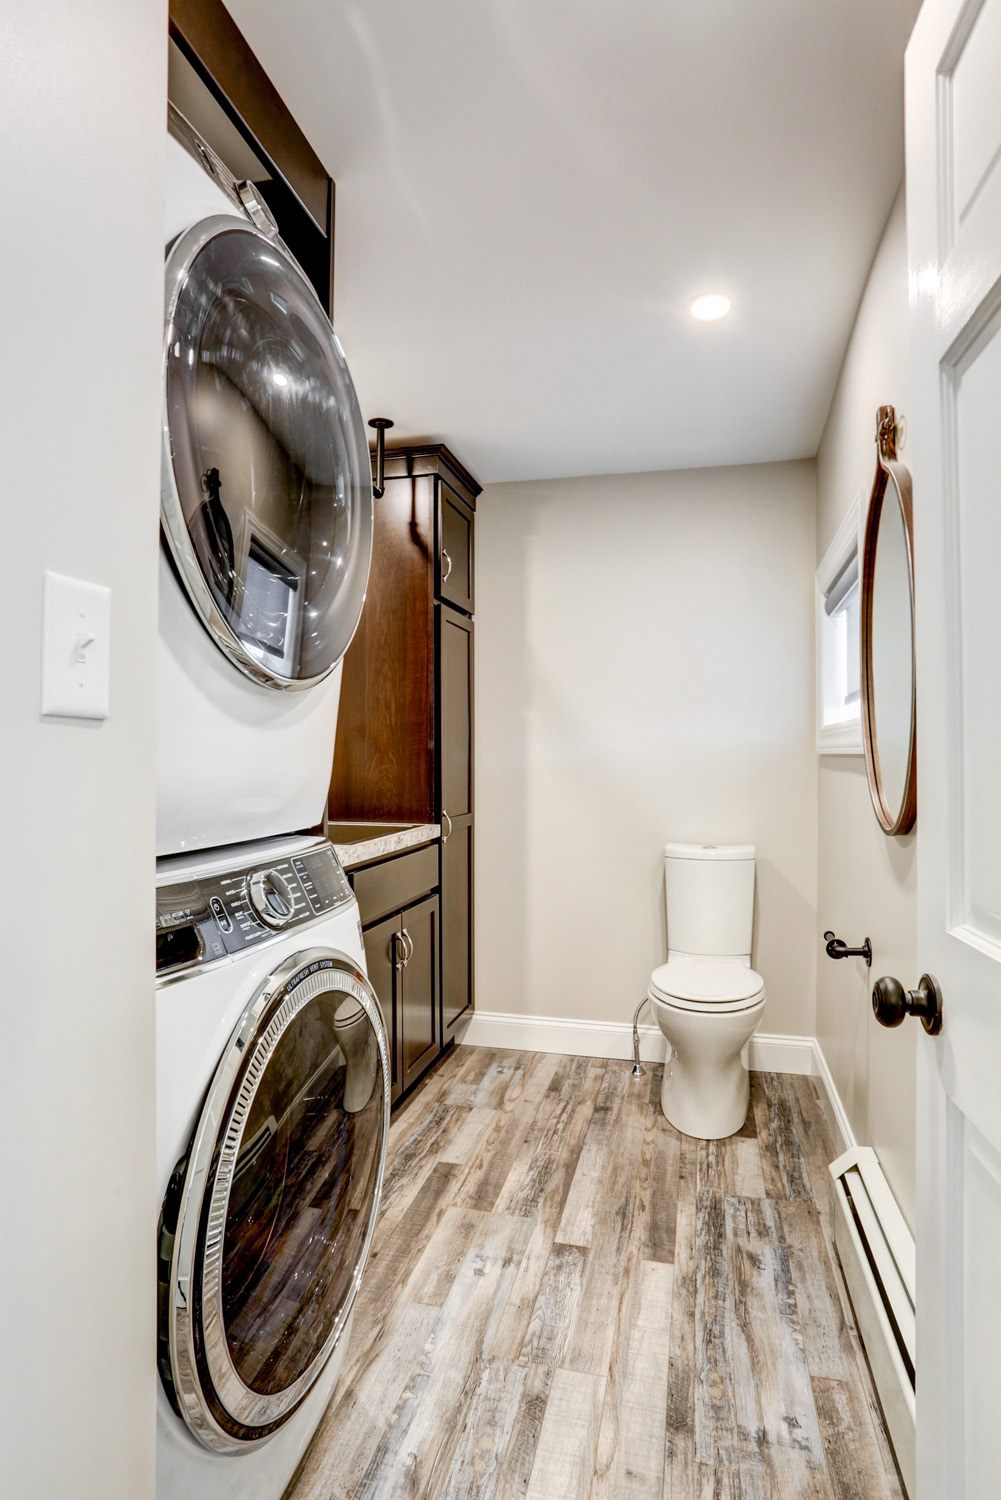 Lancaster Laundry Room and Bathroom Remodel 